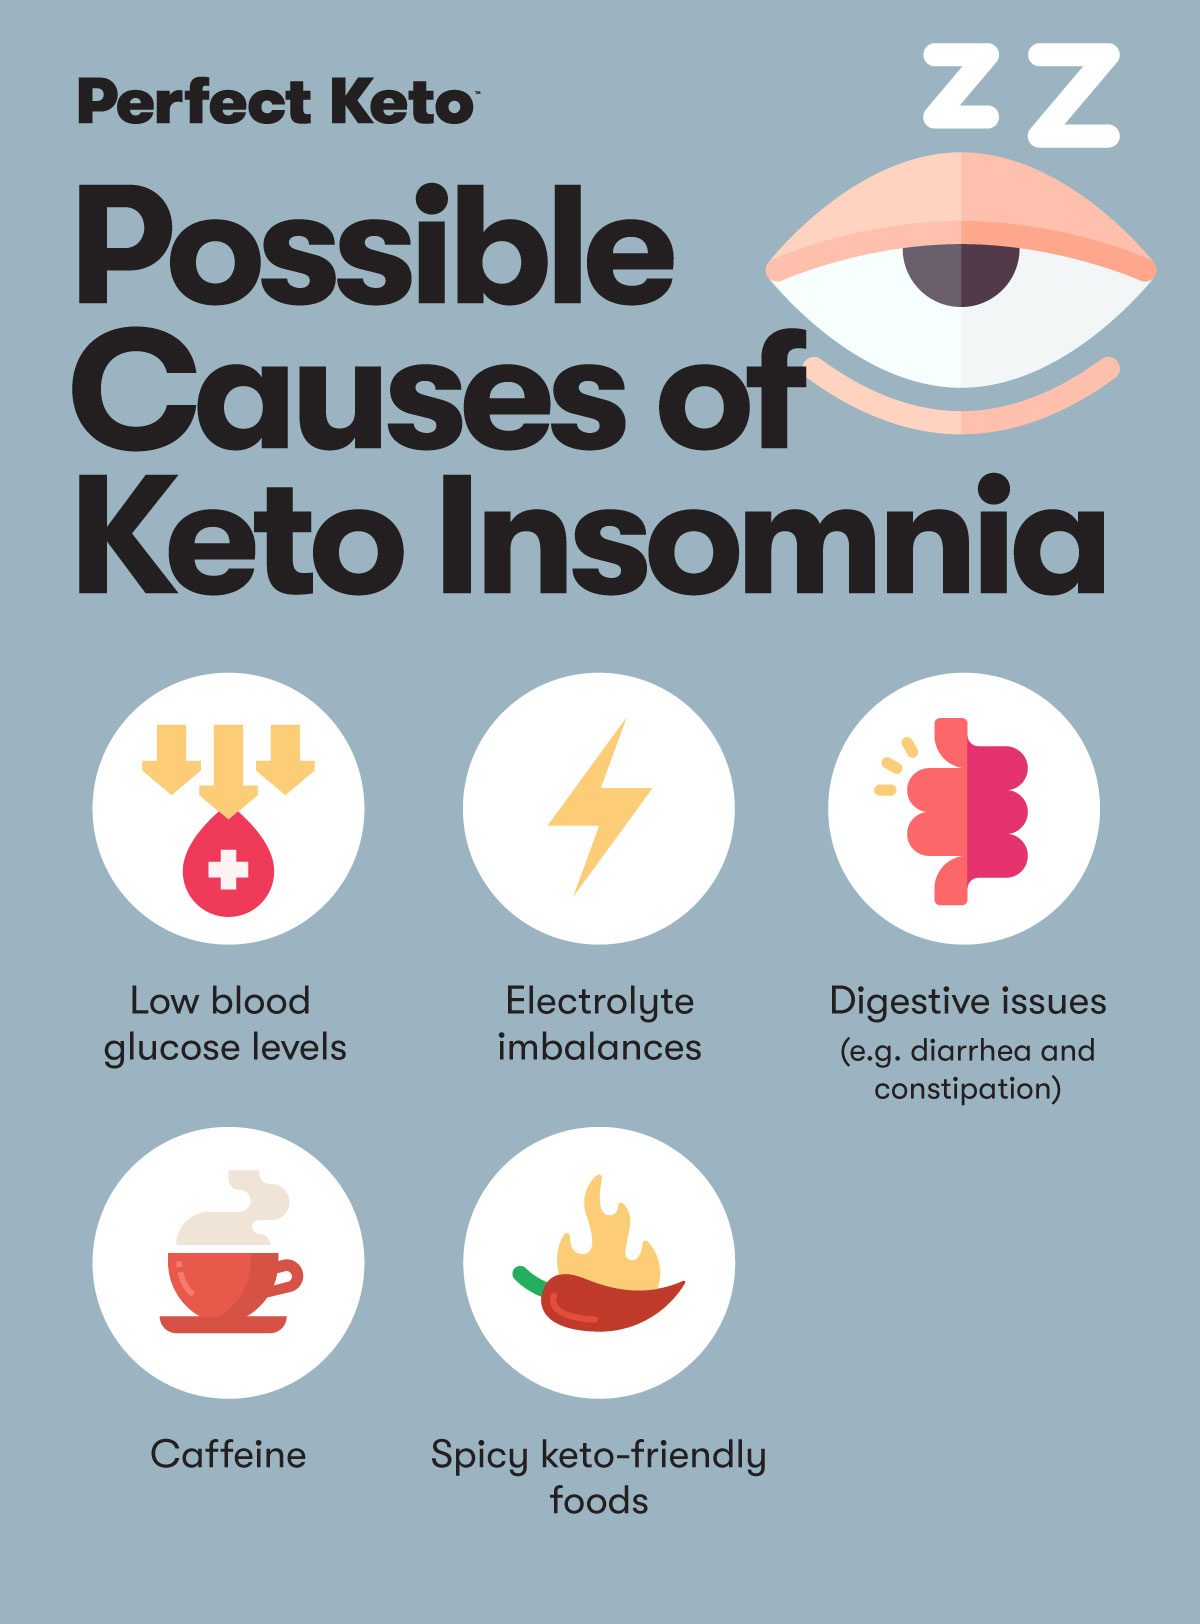 What Causes Keto Insomnia?